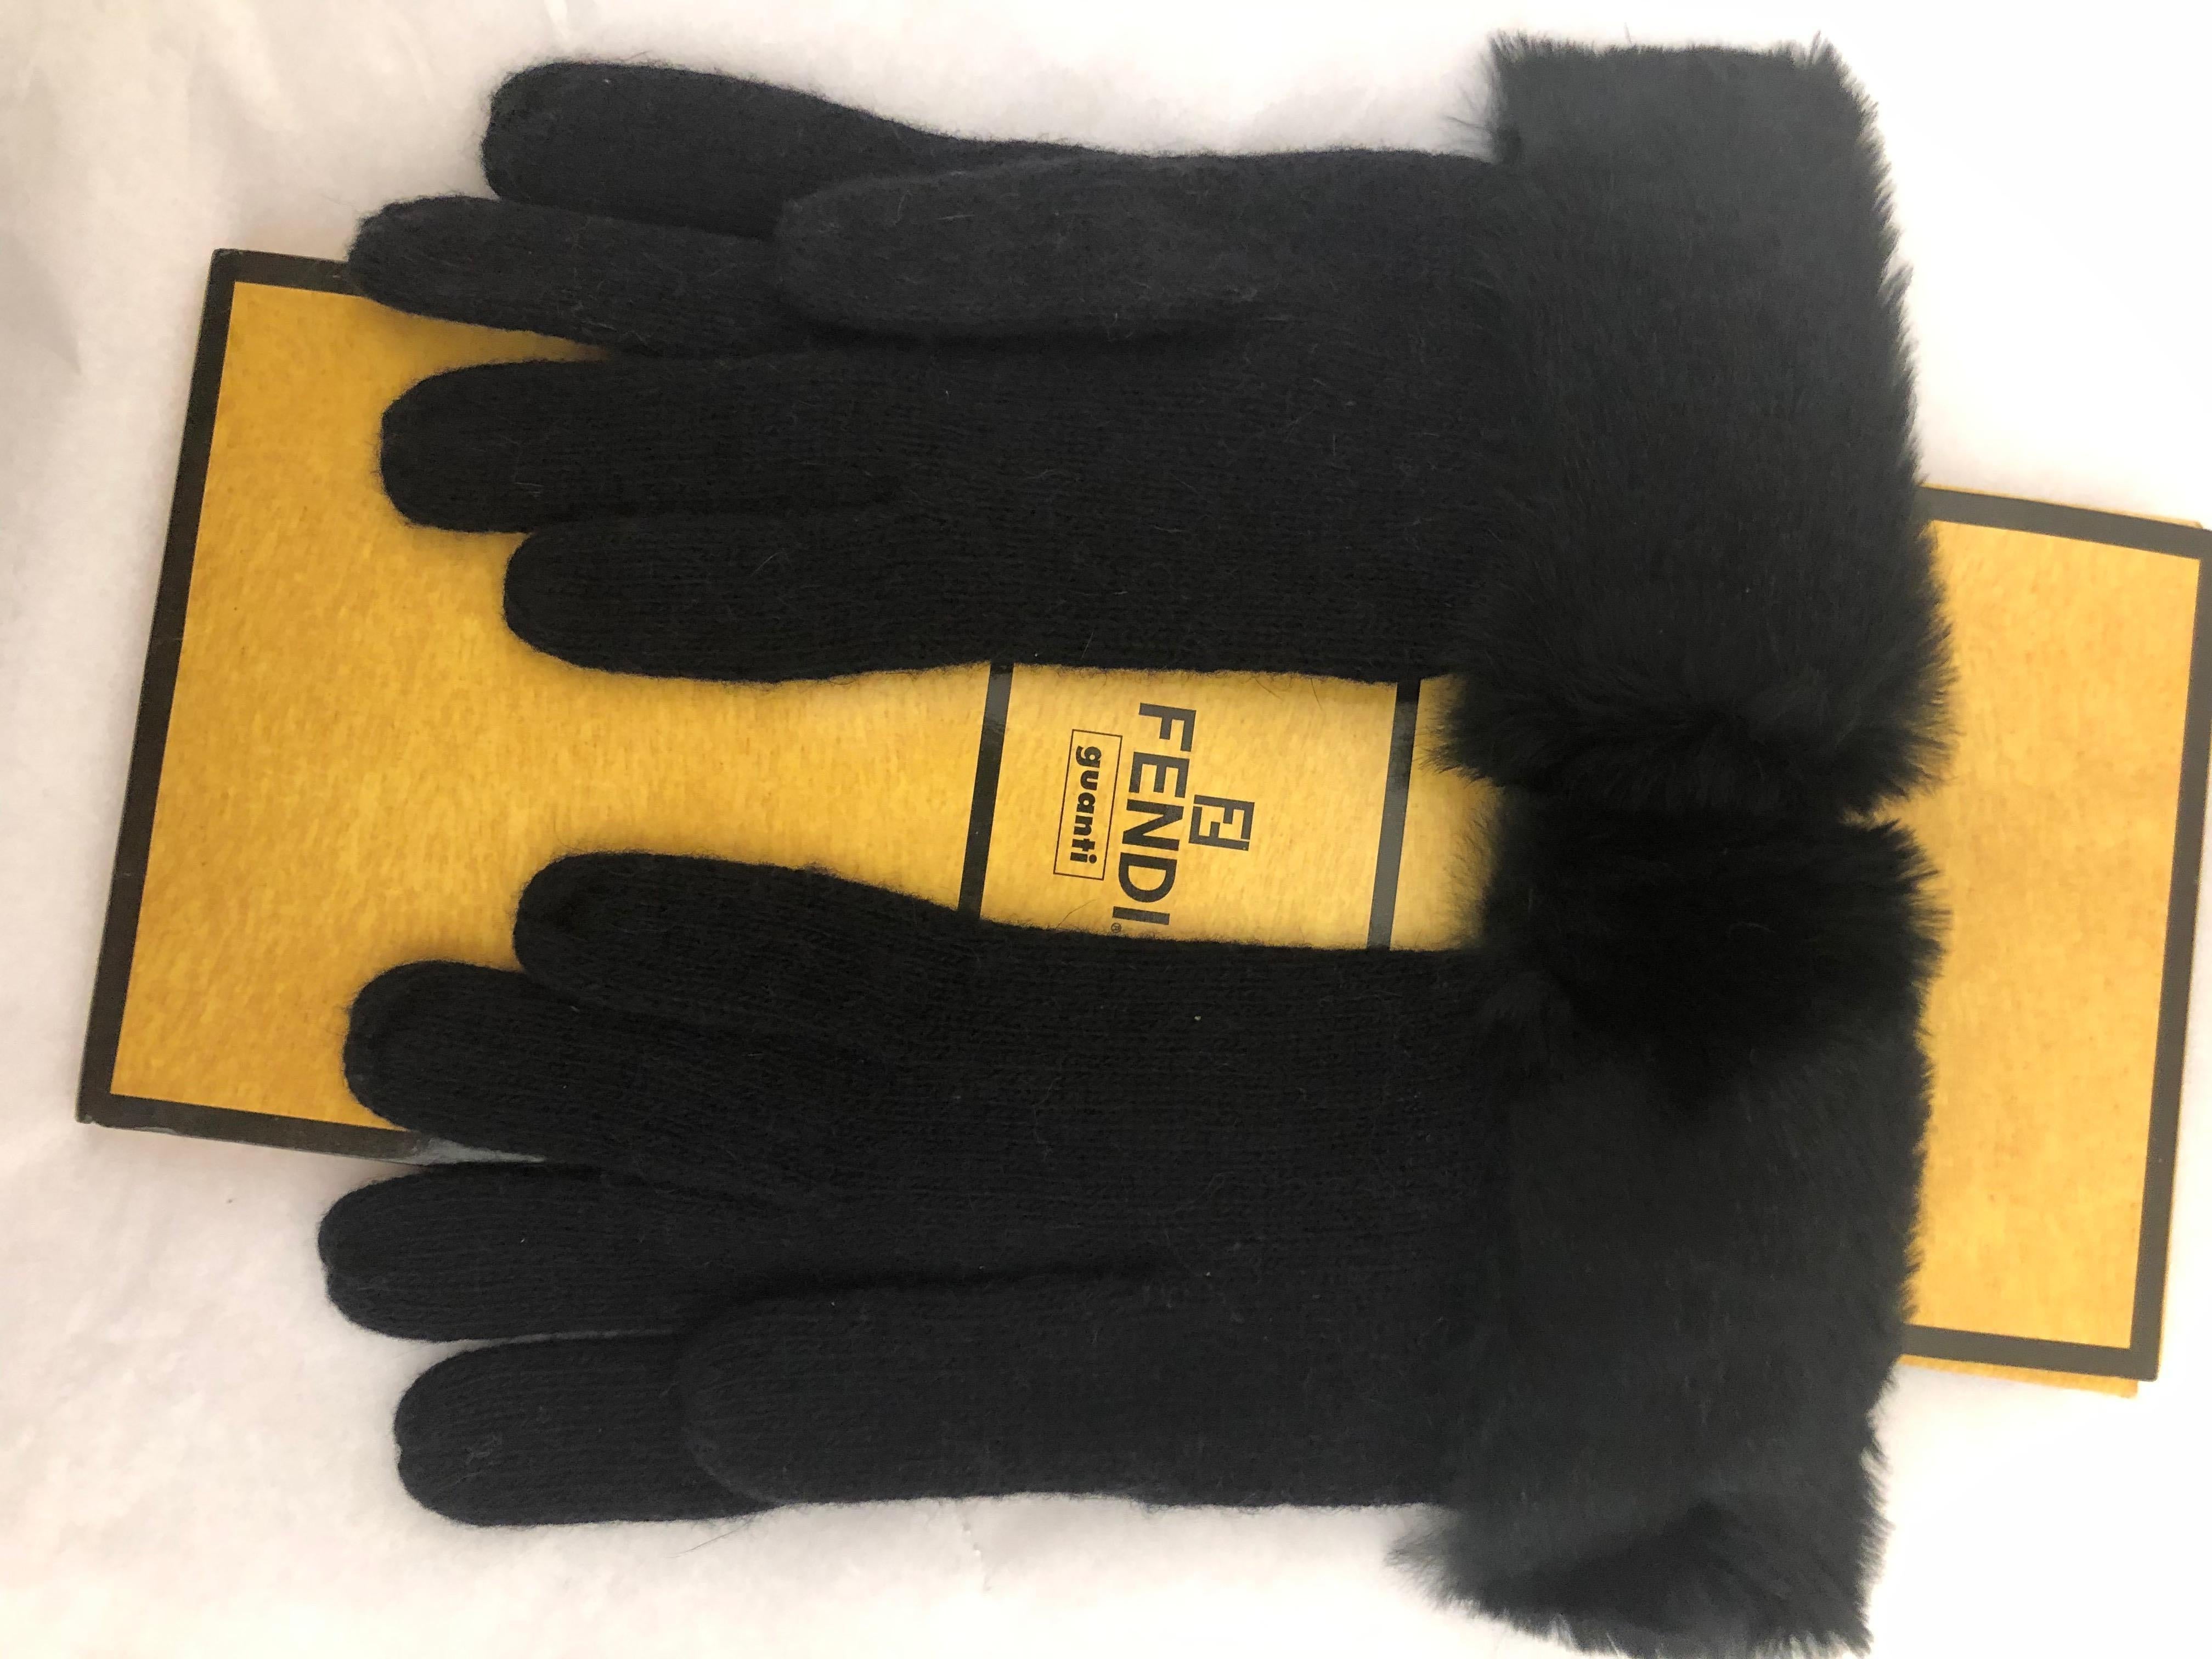 These Fendi gloves are in new condition with the Fendi logo at front.